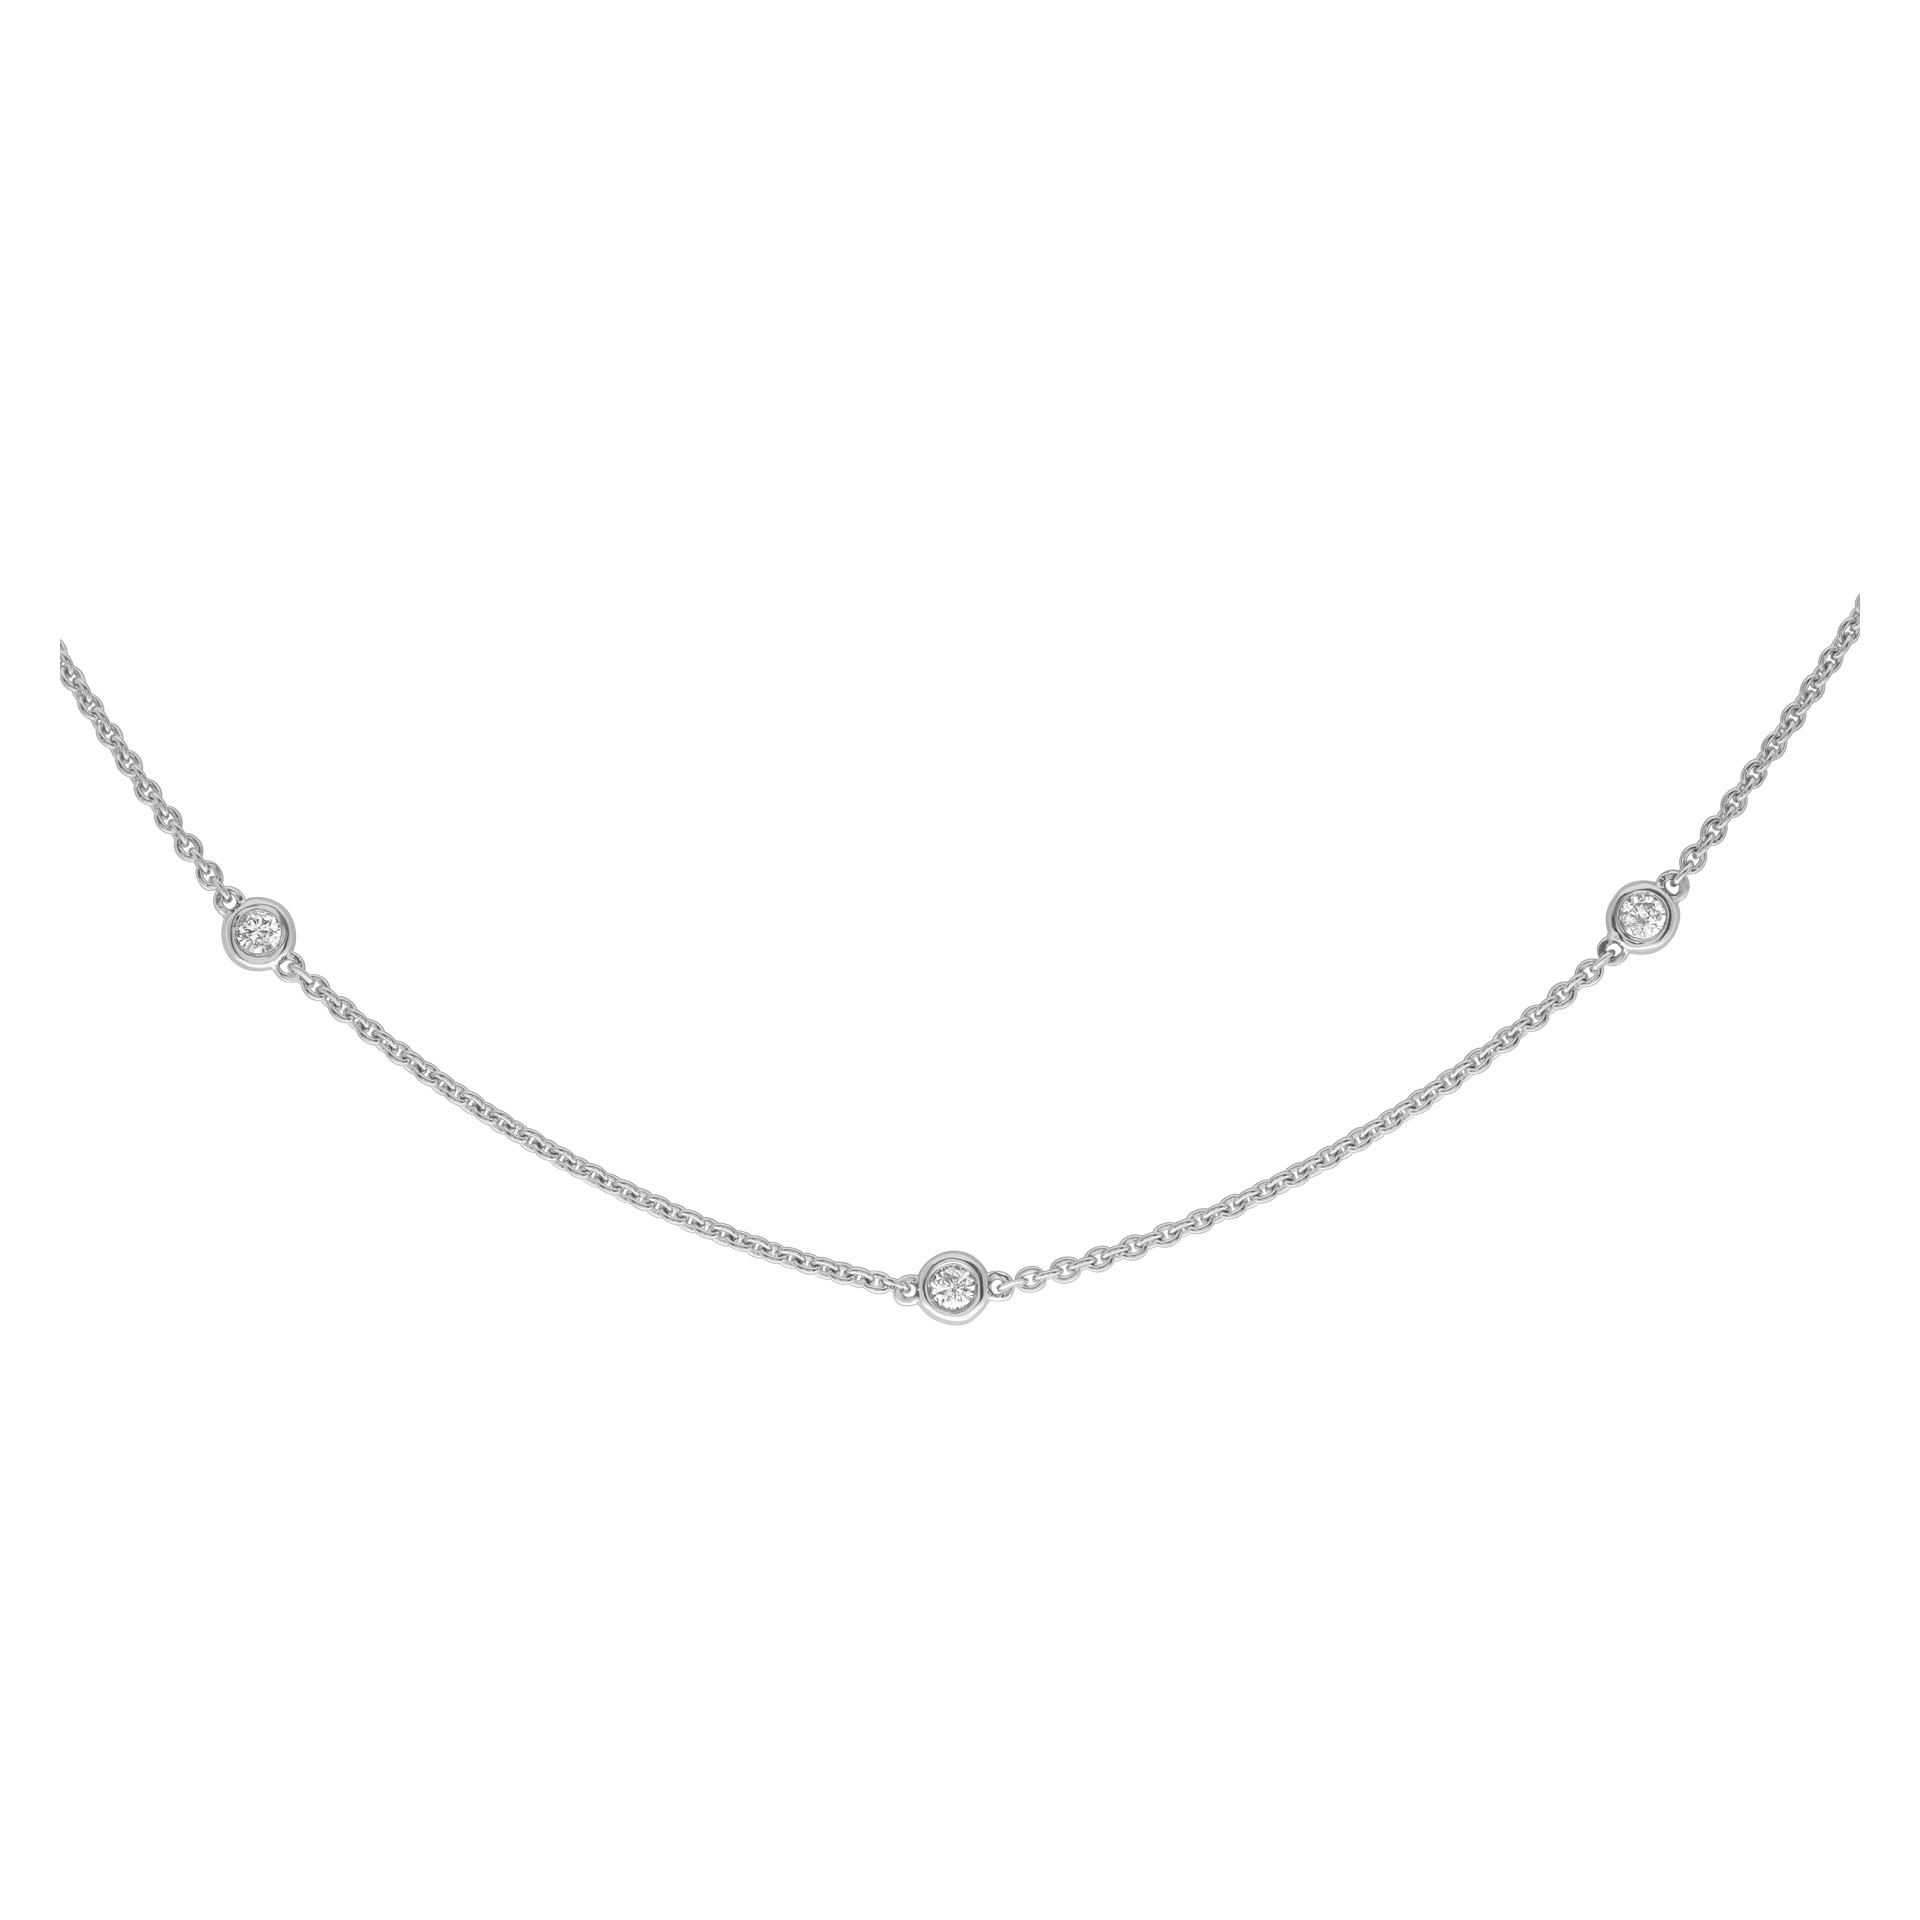 Diamonds by the yard in 14k white gold 1.05 ct in diamonds image 1